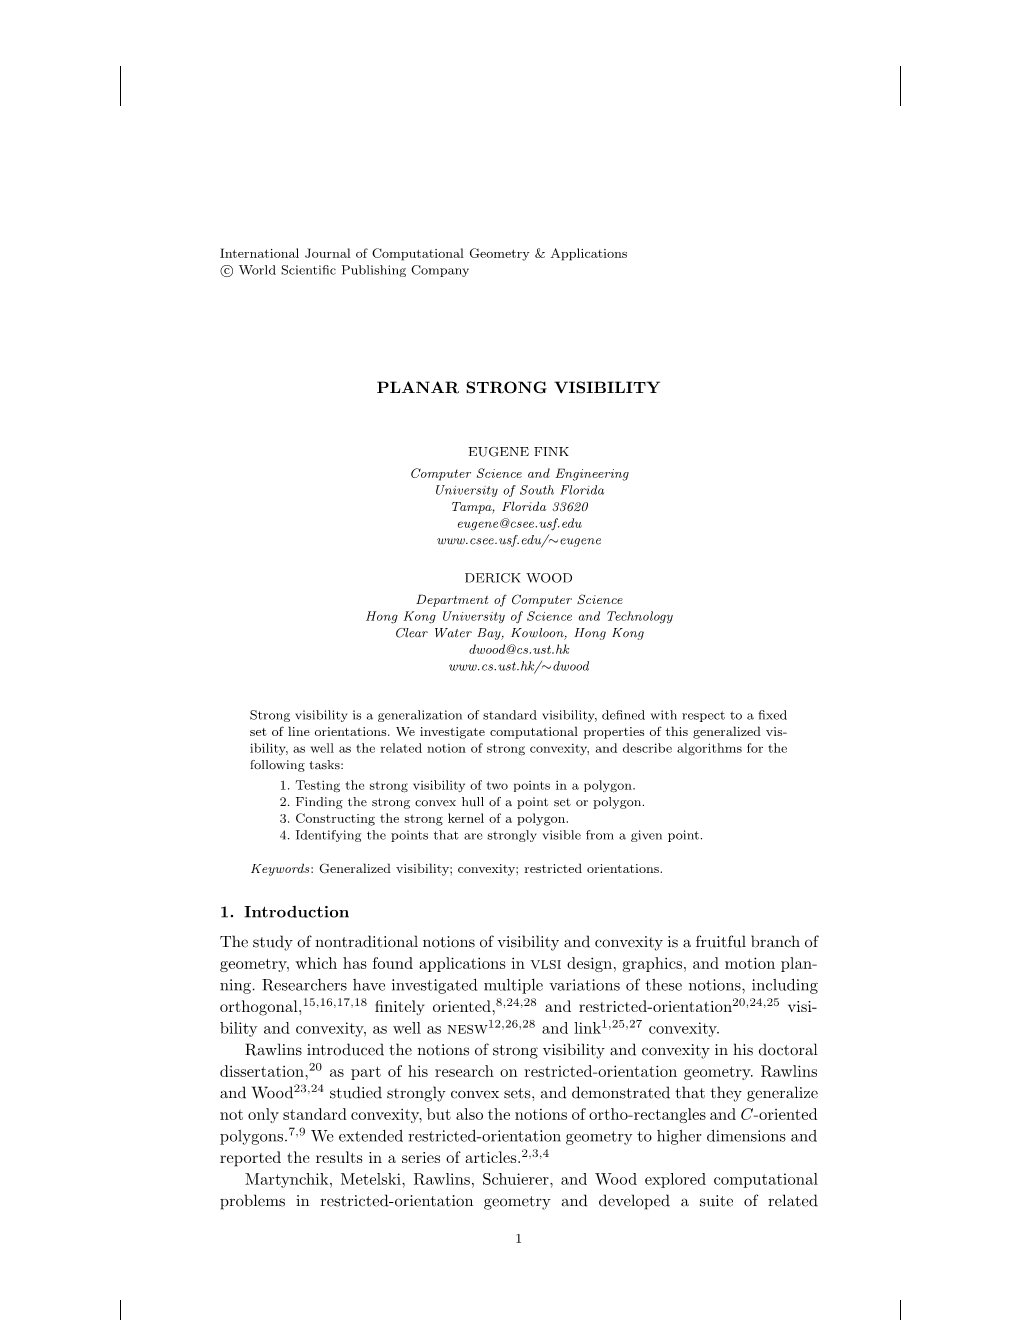 PLANAR STRONG VISIBILITY 1. Introduction the Study Of